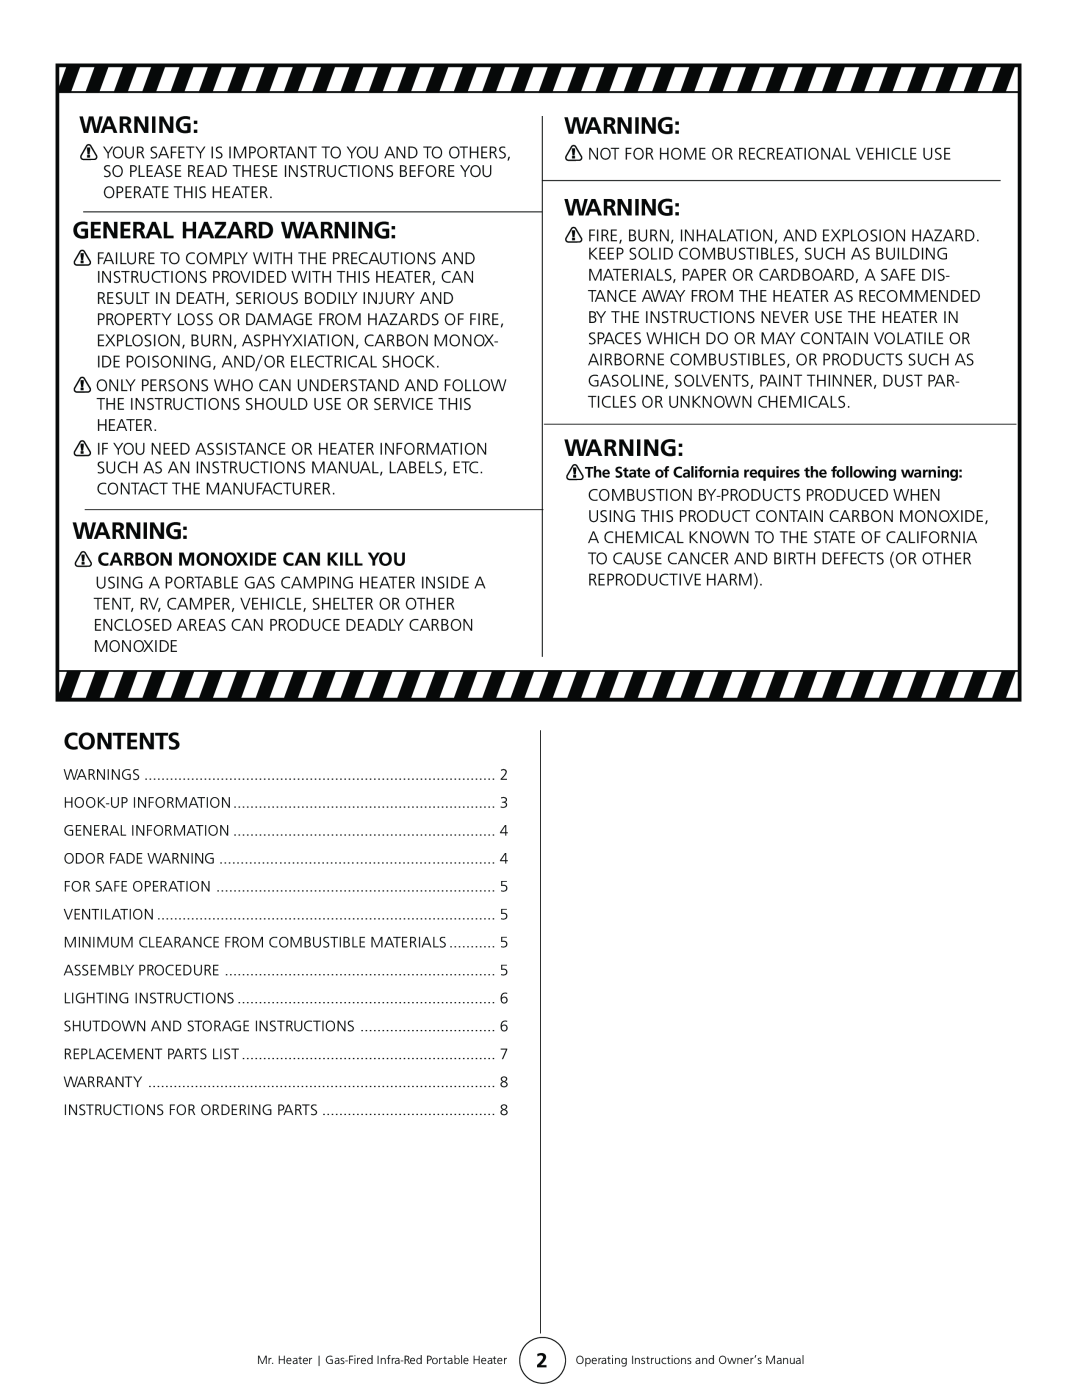 Enerco MH24TS owner manual General Hazard Warning, Contents, Carbon Monoxide Can Kill You 